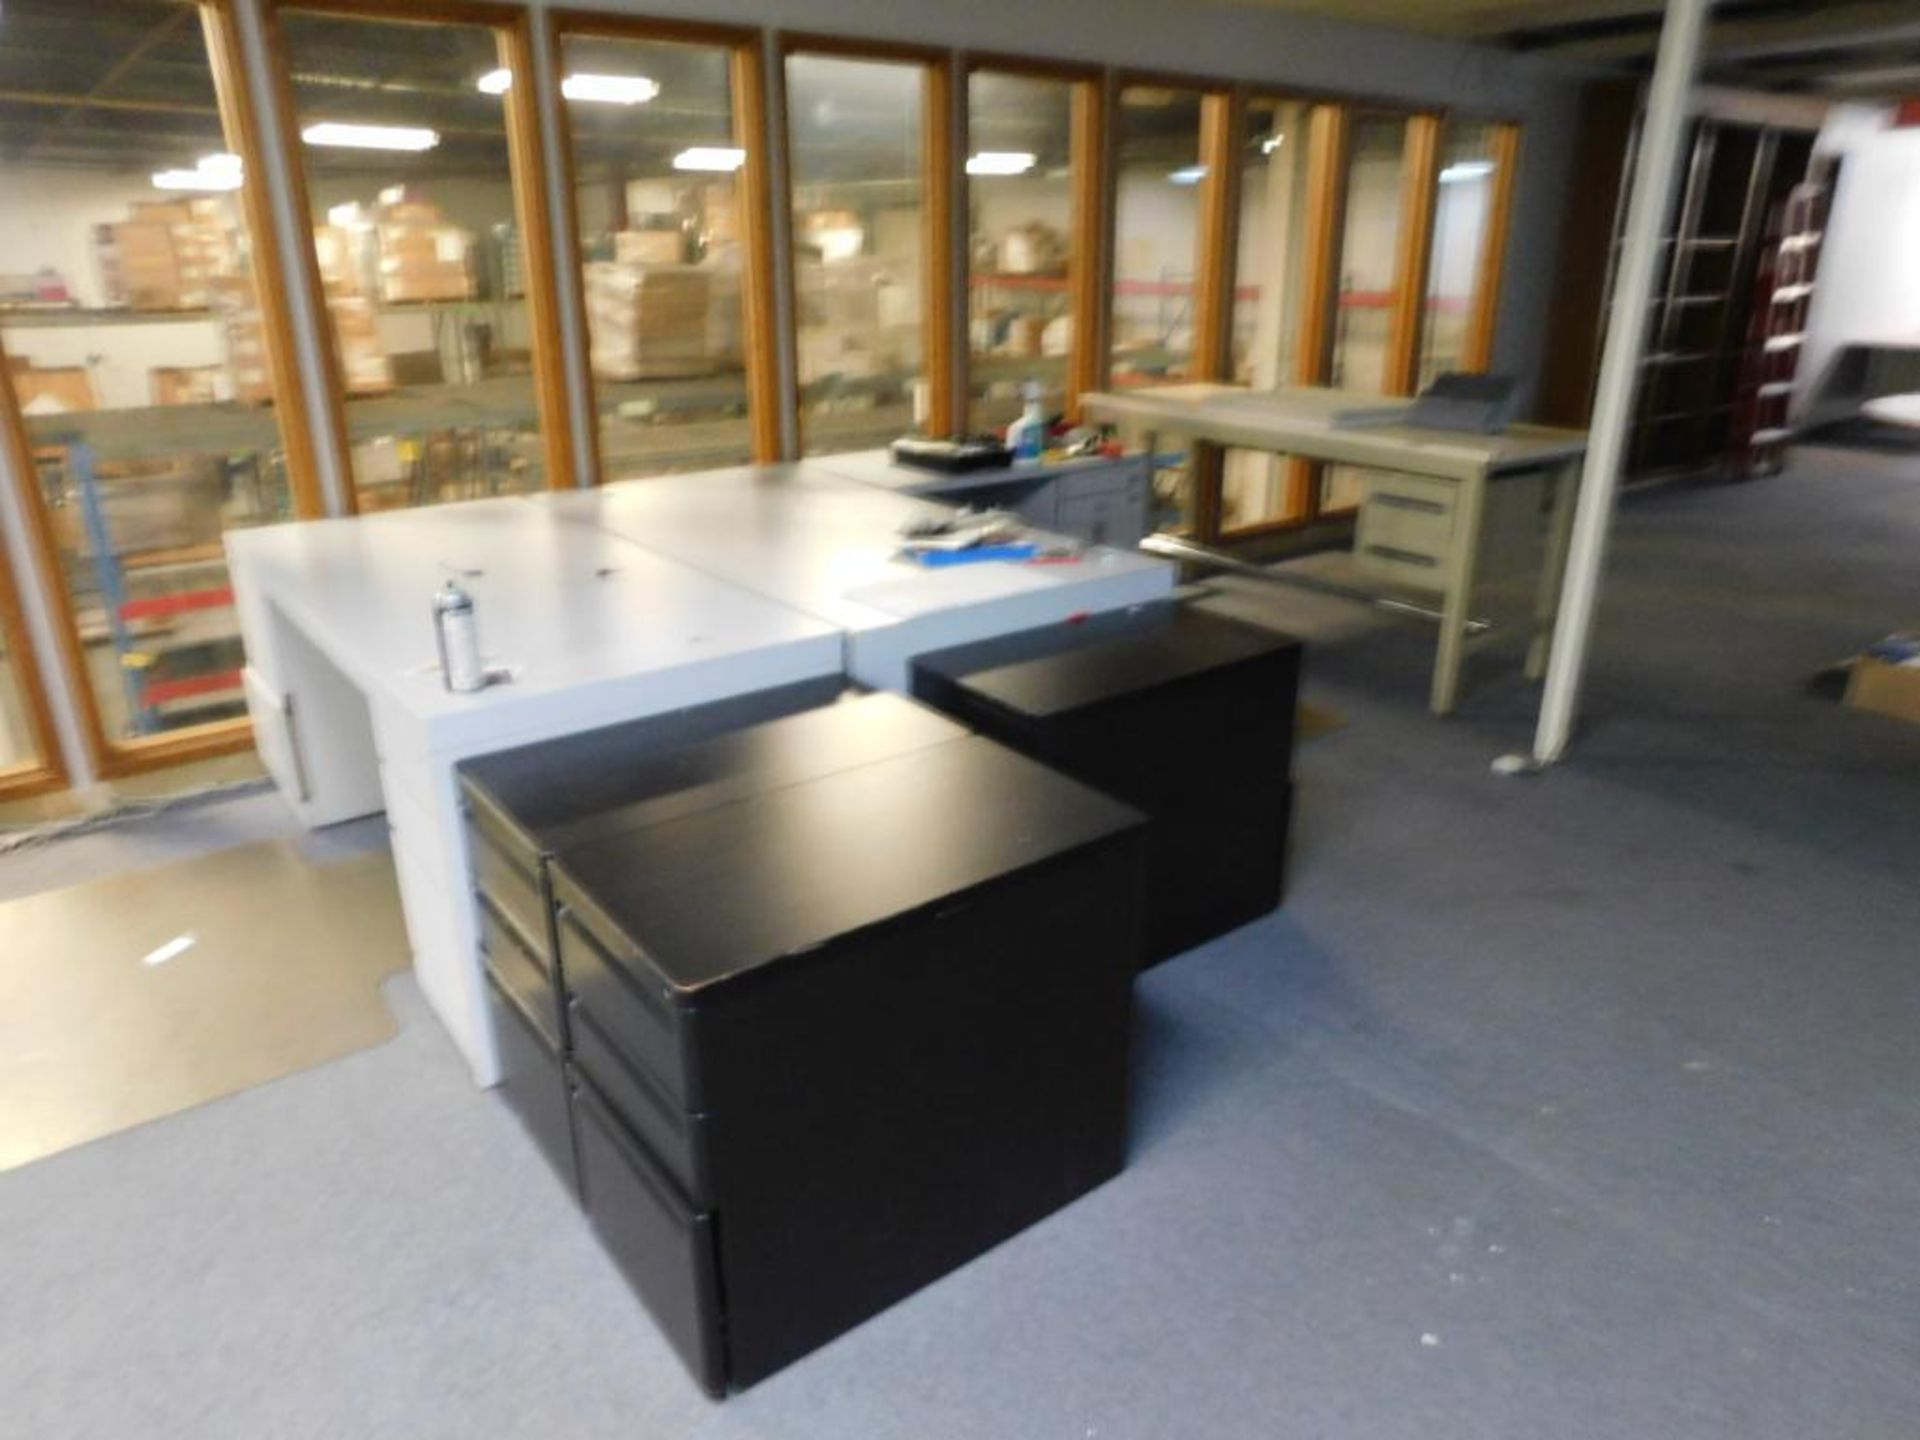 LOT: Contents of 2nd Floor Offices (NO ELEVATOR): Desks, File Cabinets, Book Cases, Chairs, Tables, - Image 7 of 9